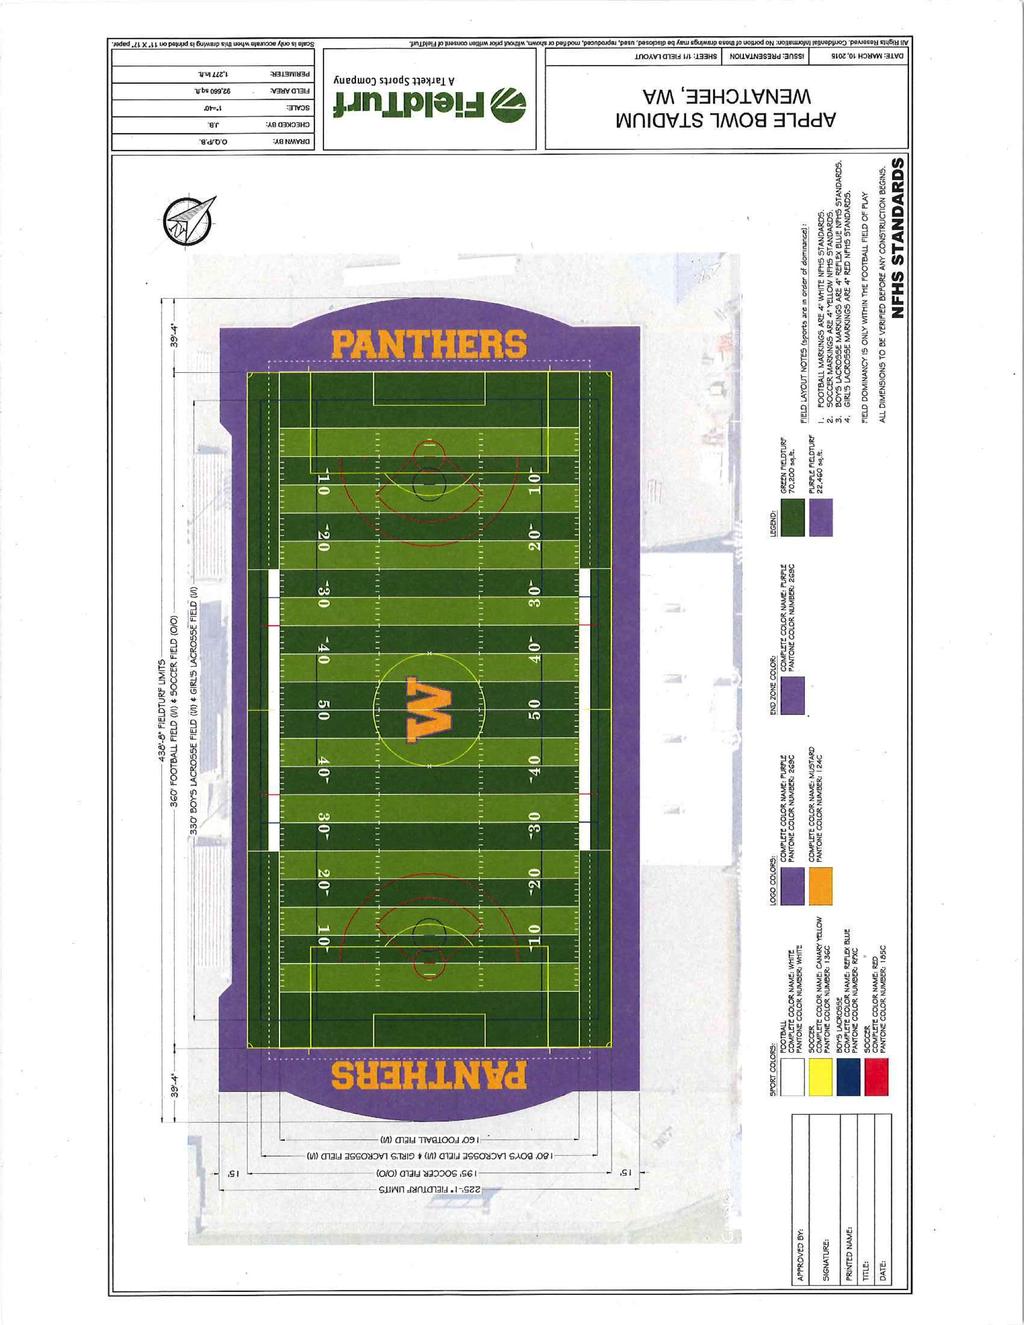 FieldTurf is subcontracting Goodfellow to remove the sod. Their bid was minimal. Project can start as early as May and be completed in 10 weeks.